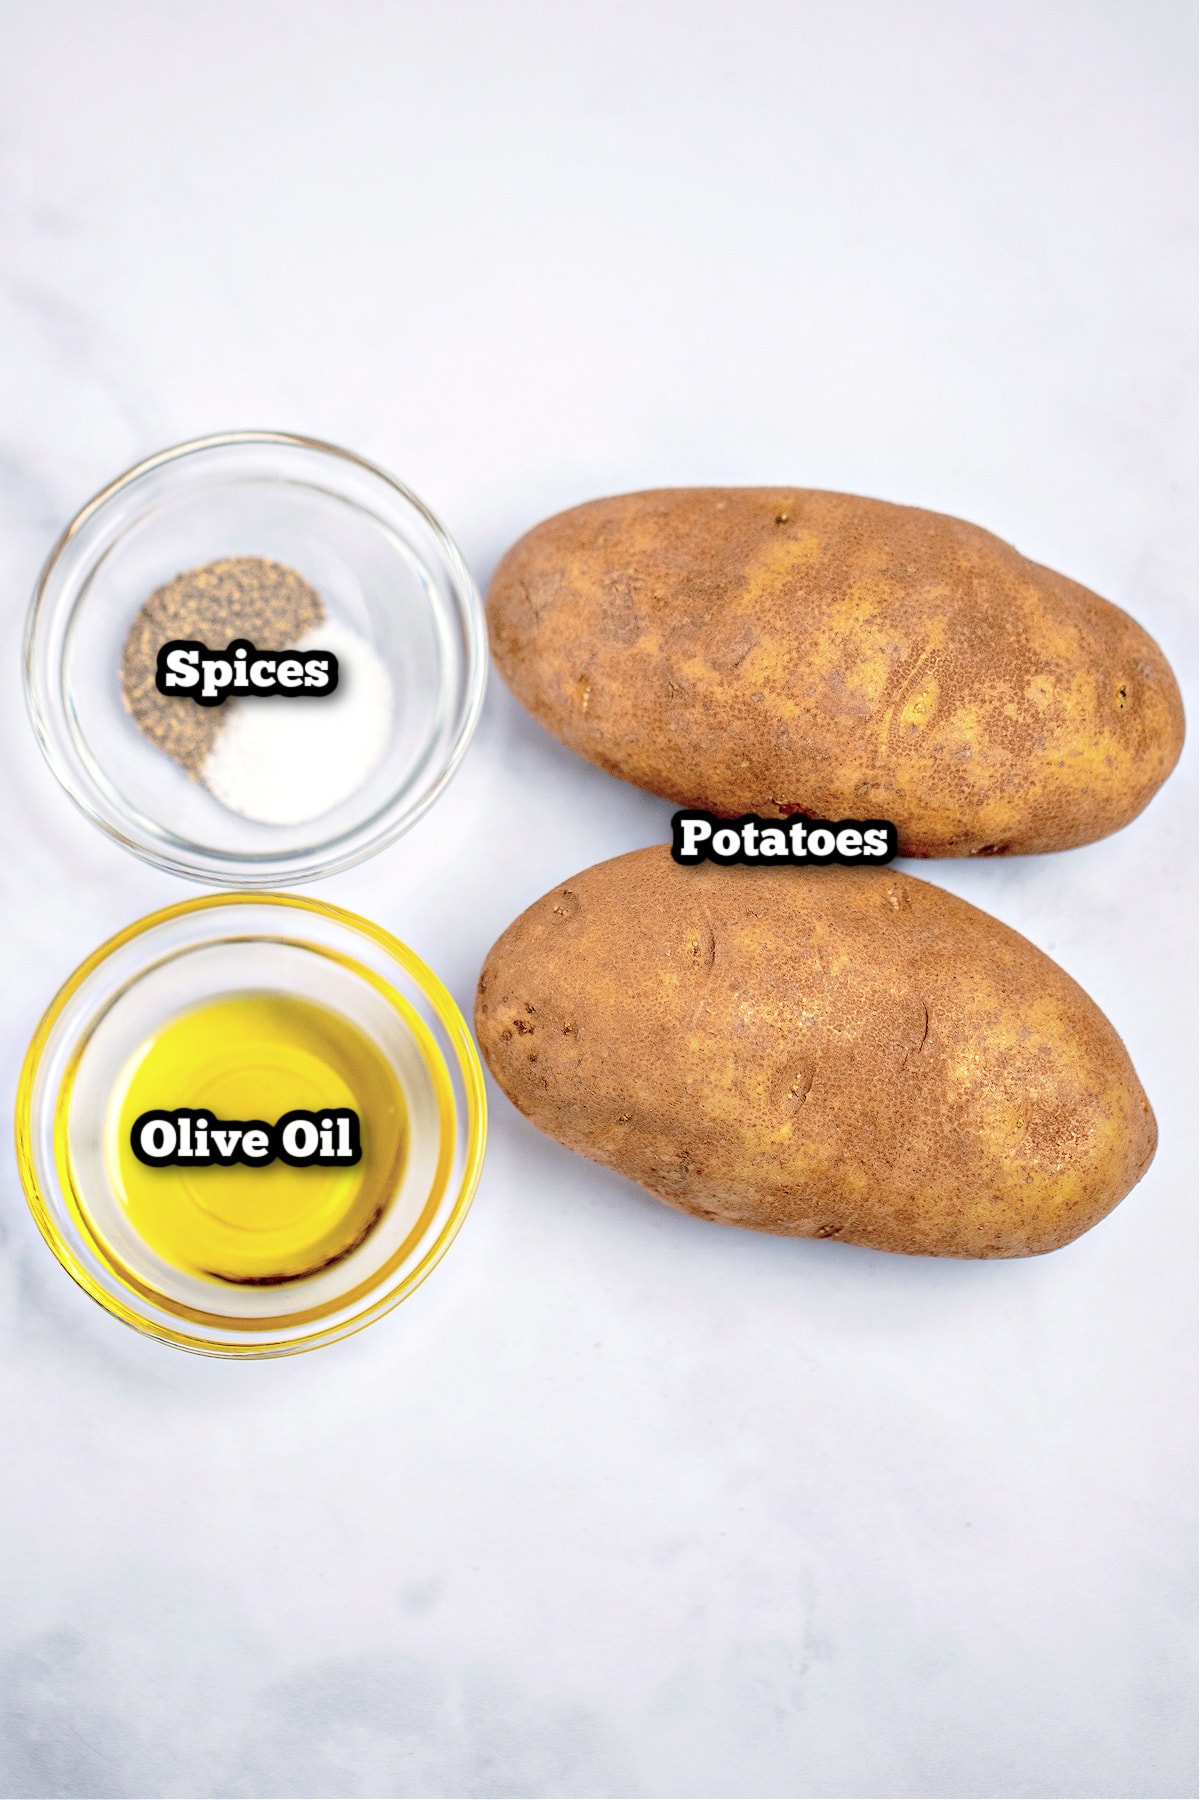 Individual ingredients for air fryer baked potatoes on a table.